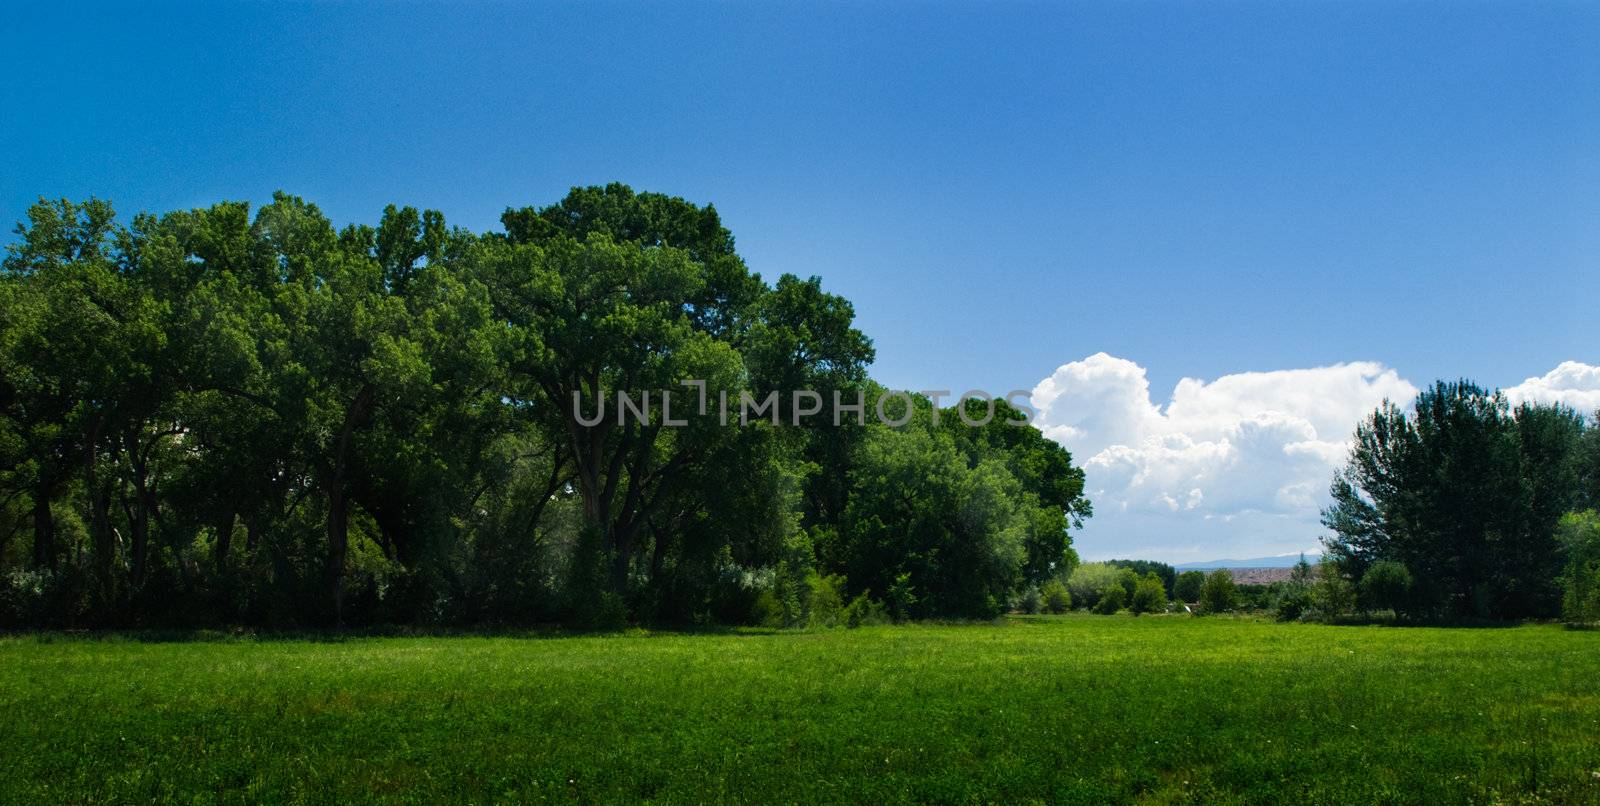 Blue sky, lush green field, and forest